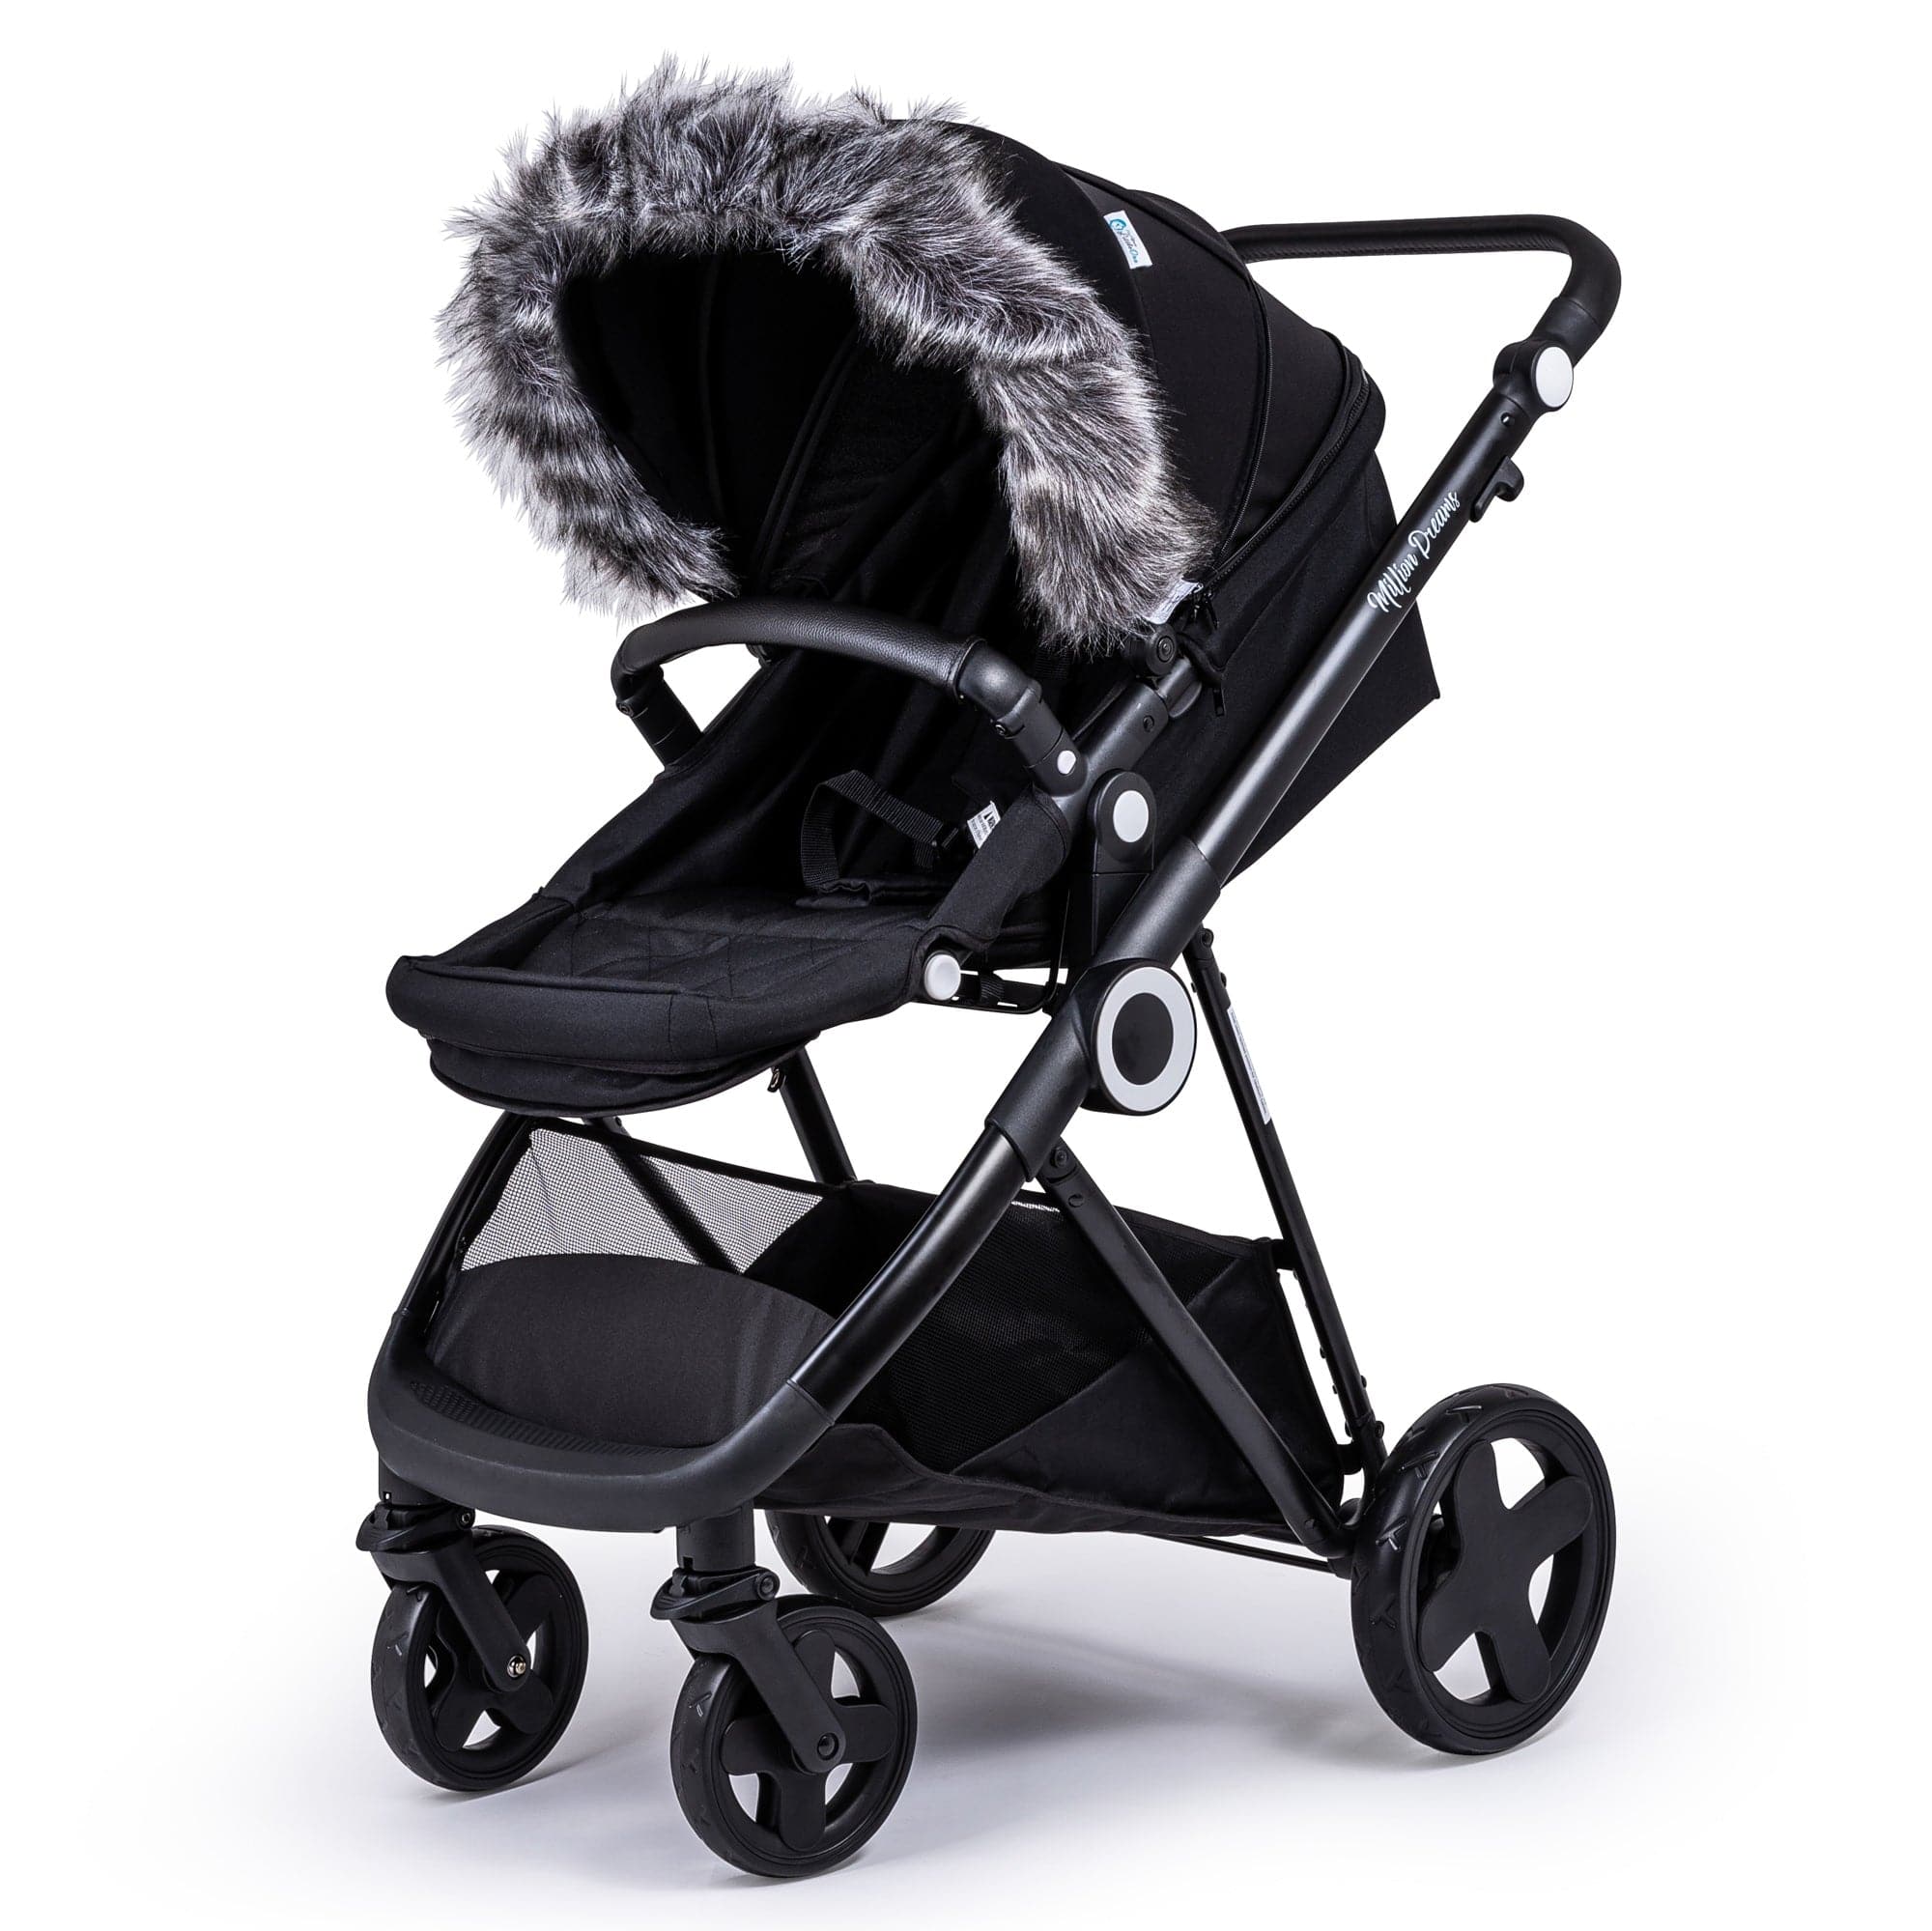 Pram Fur Hood Trim Attachment For Pushchair Compatible with Kinderkraft - Dark Grey / Fits All Models | For Your Little One